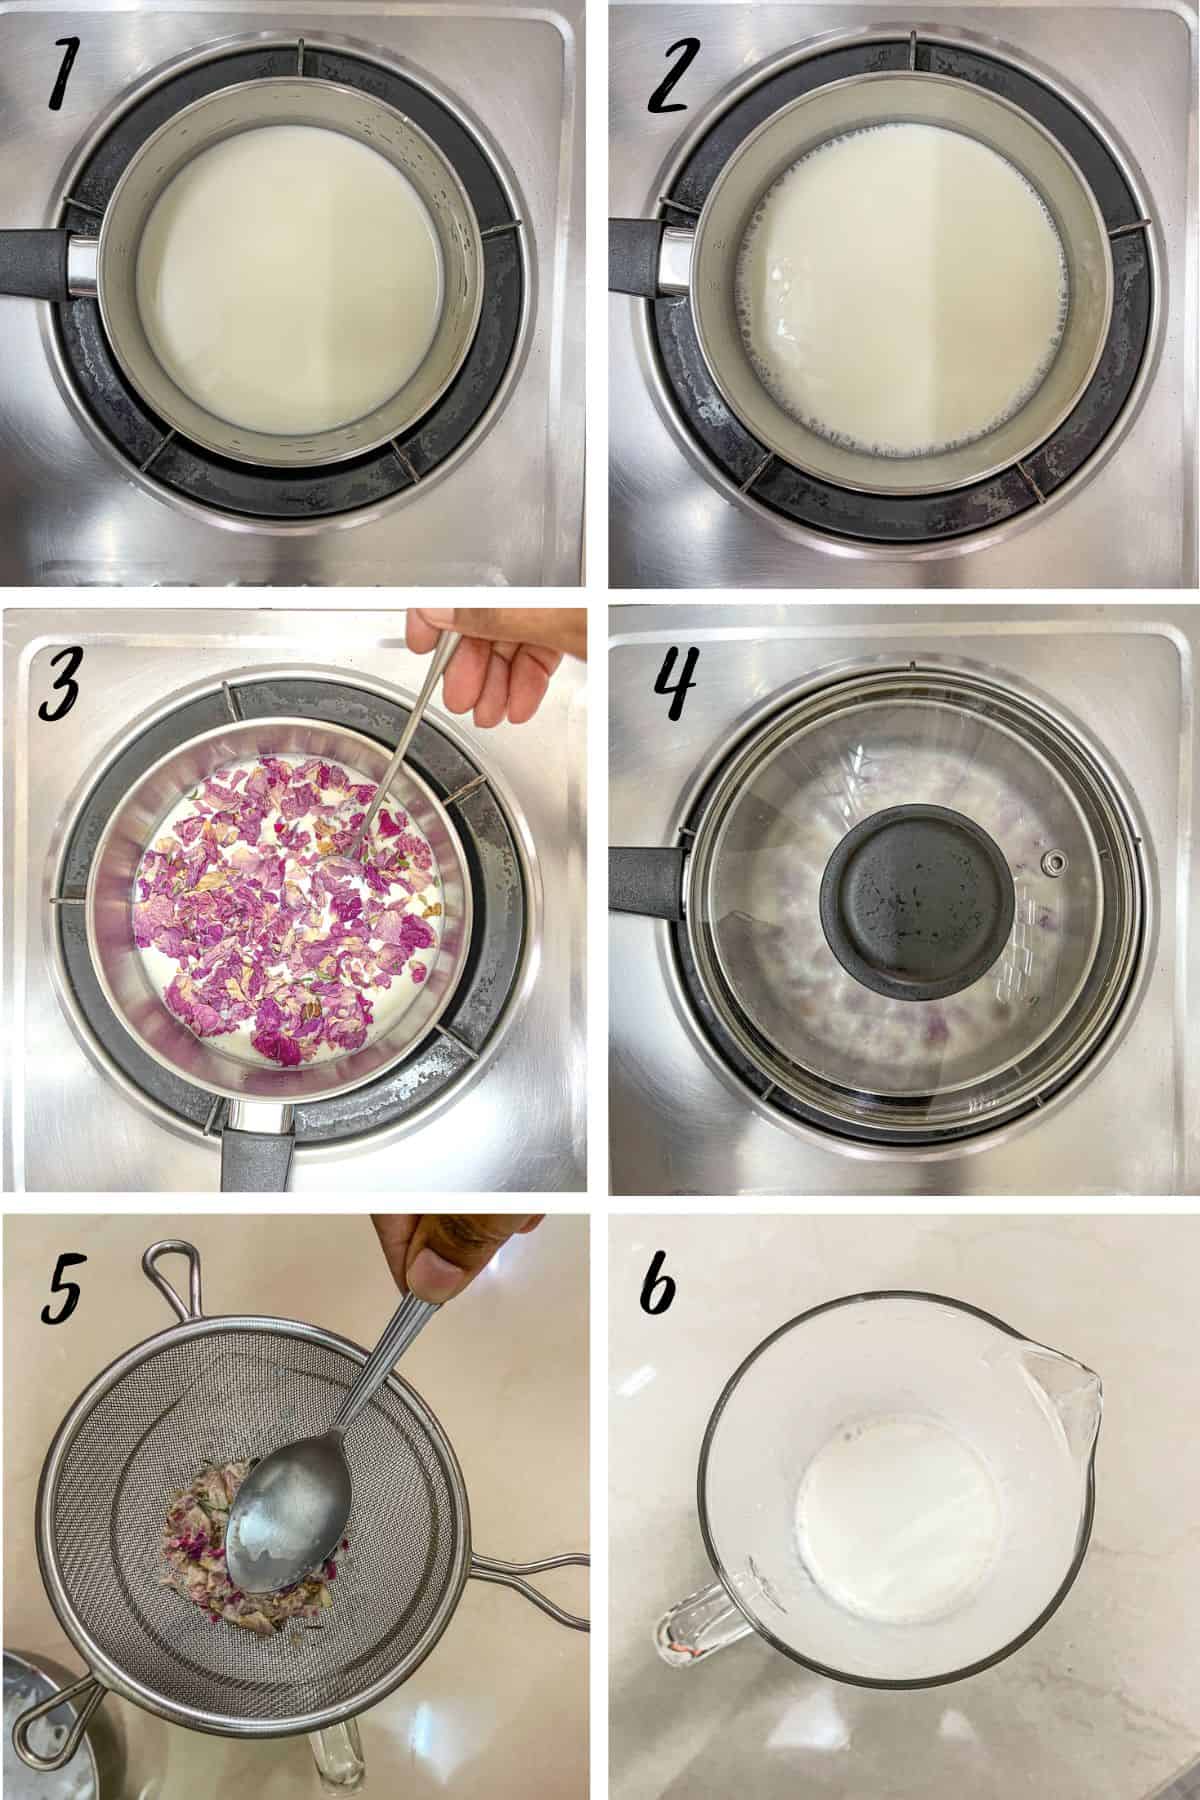 A poster of 4 images showing how to steep dried rose petals in milk.